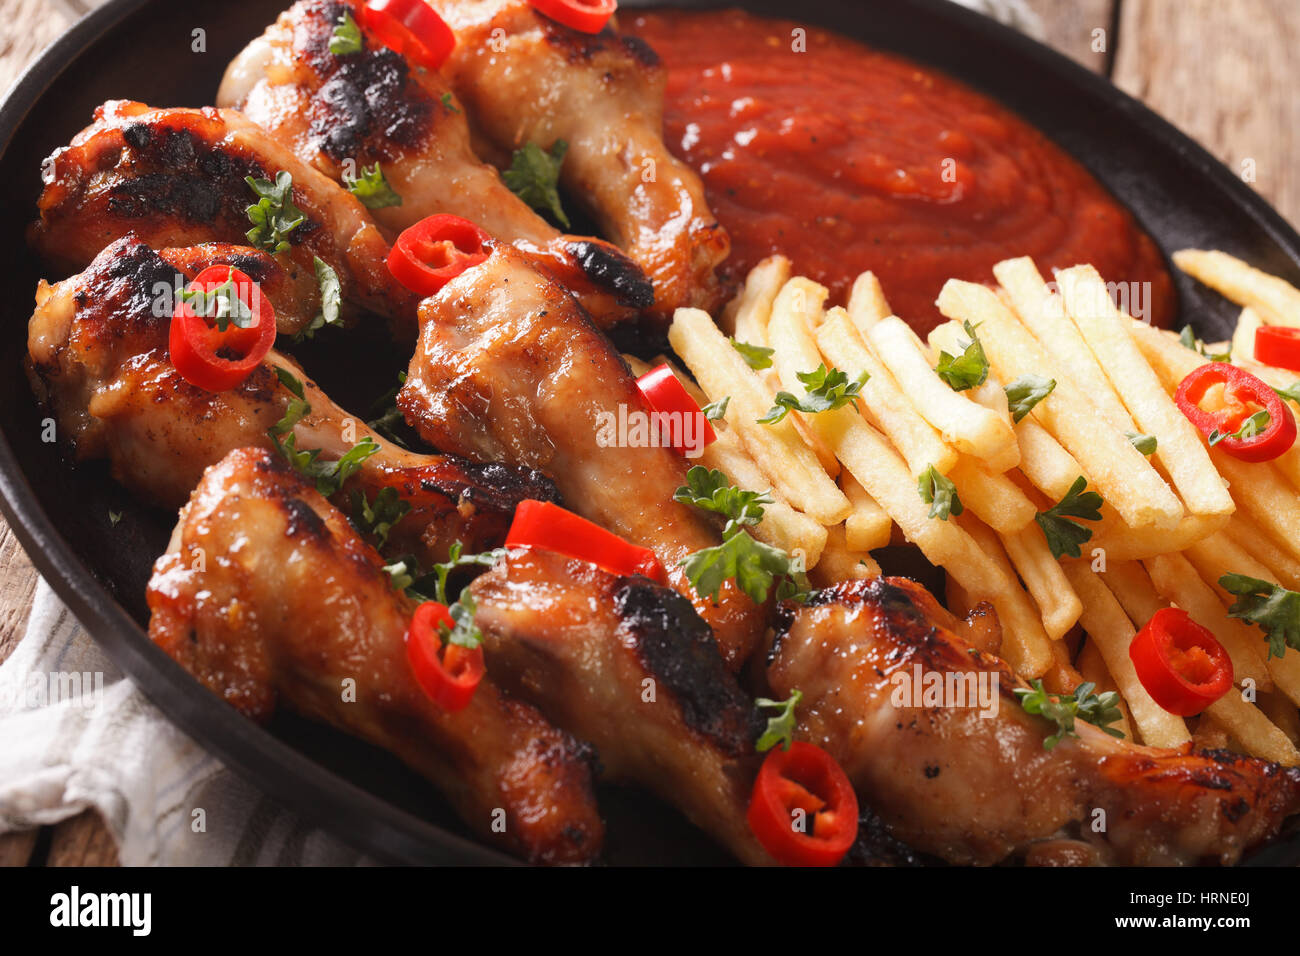 Delicious barbecue chicken wings with french fries and ketchup on a plate close-up. horizontal Stock Photo